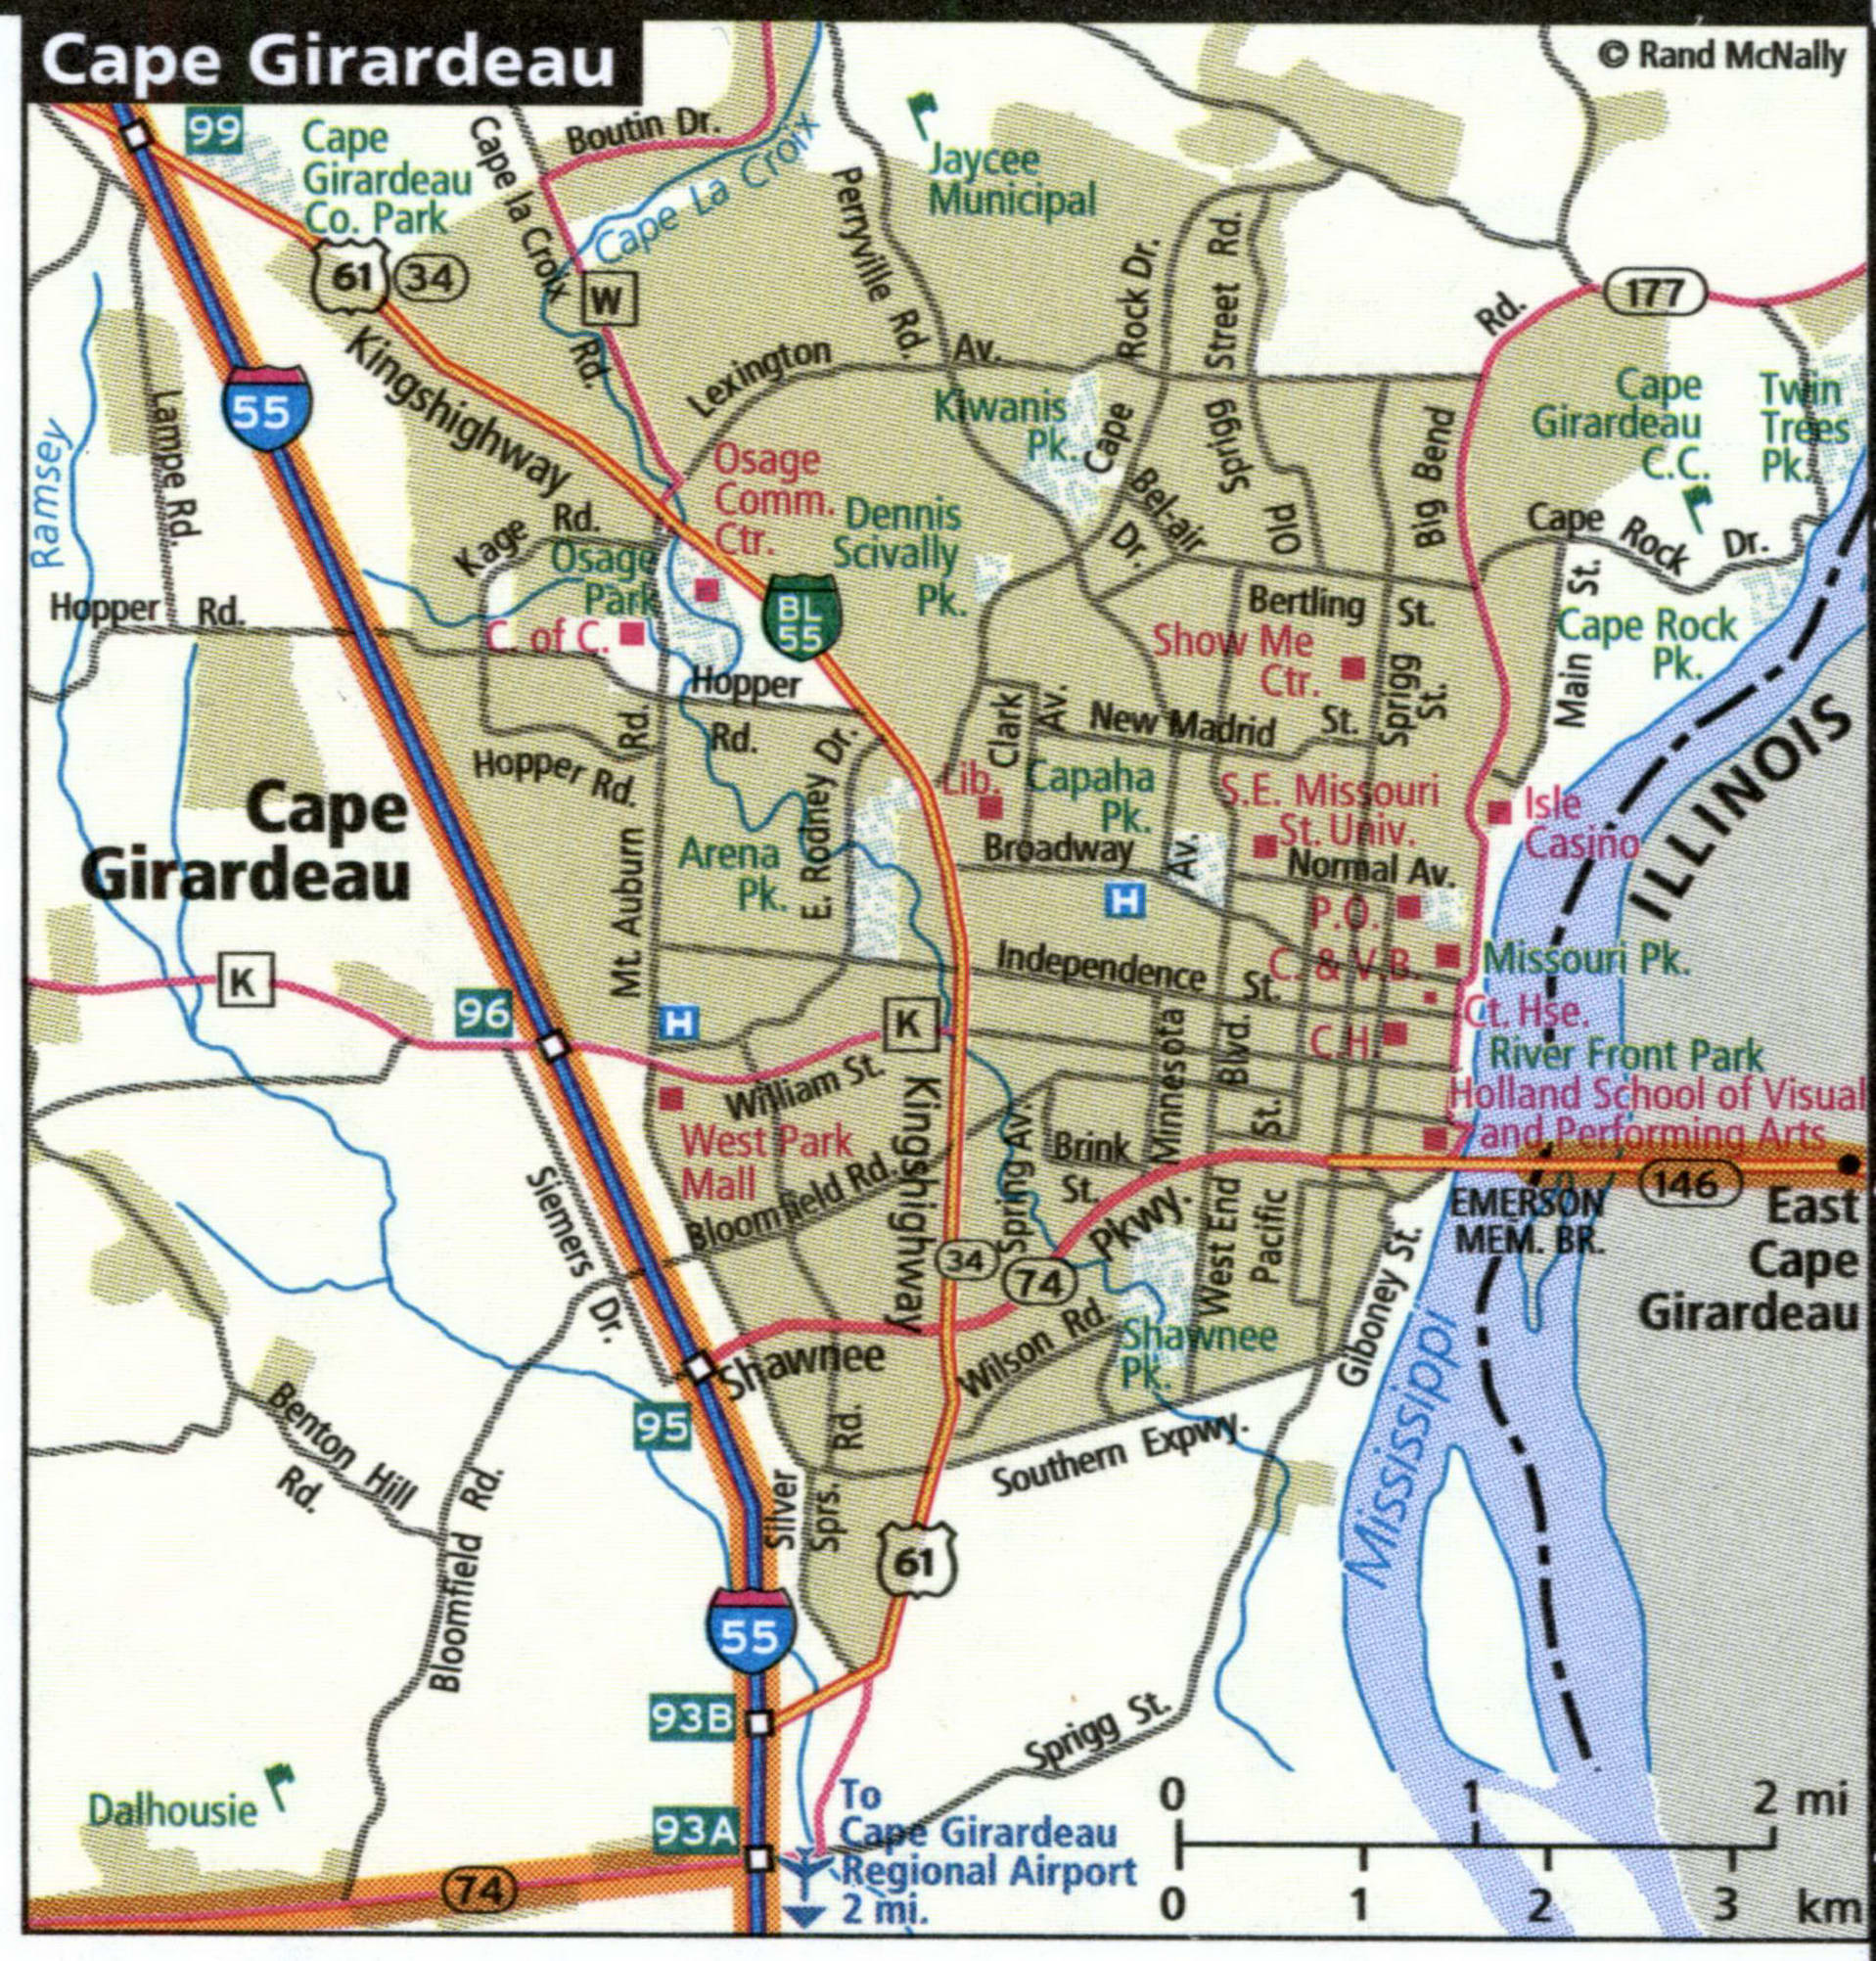 Cape Girardeau city road map for truck drivers area town toll free